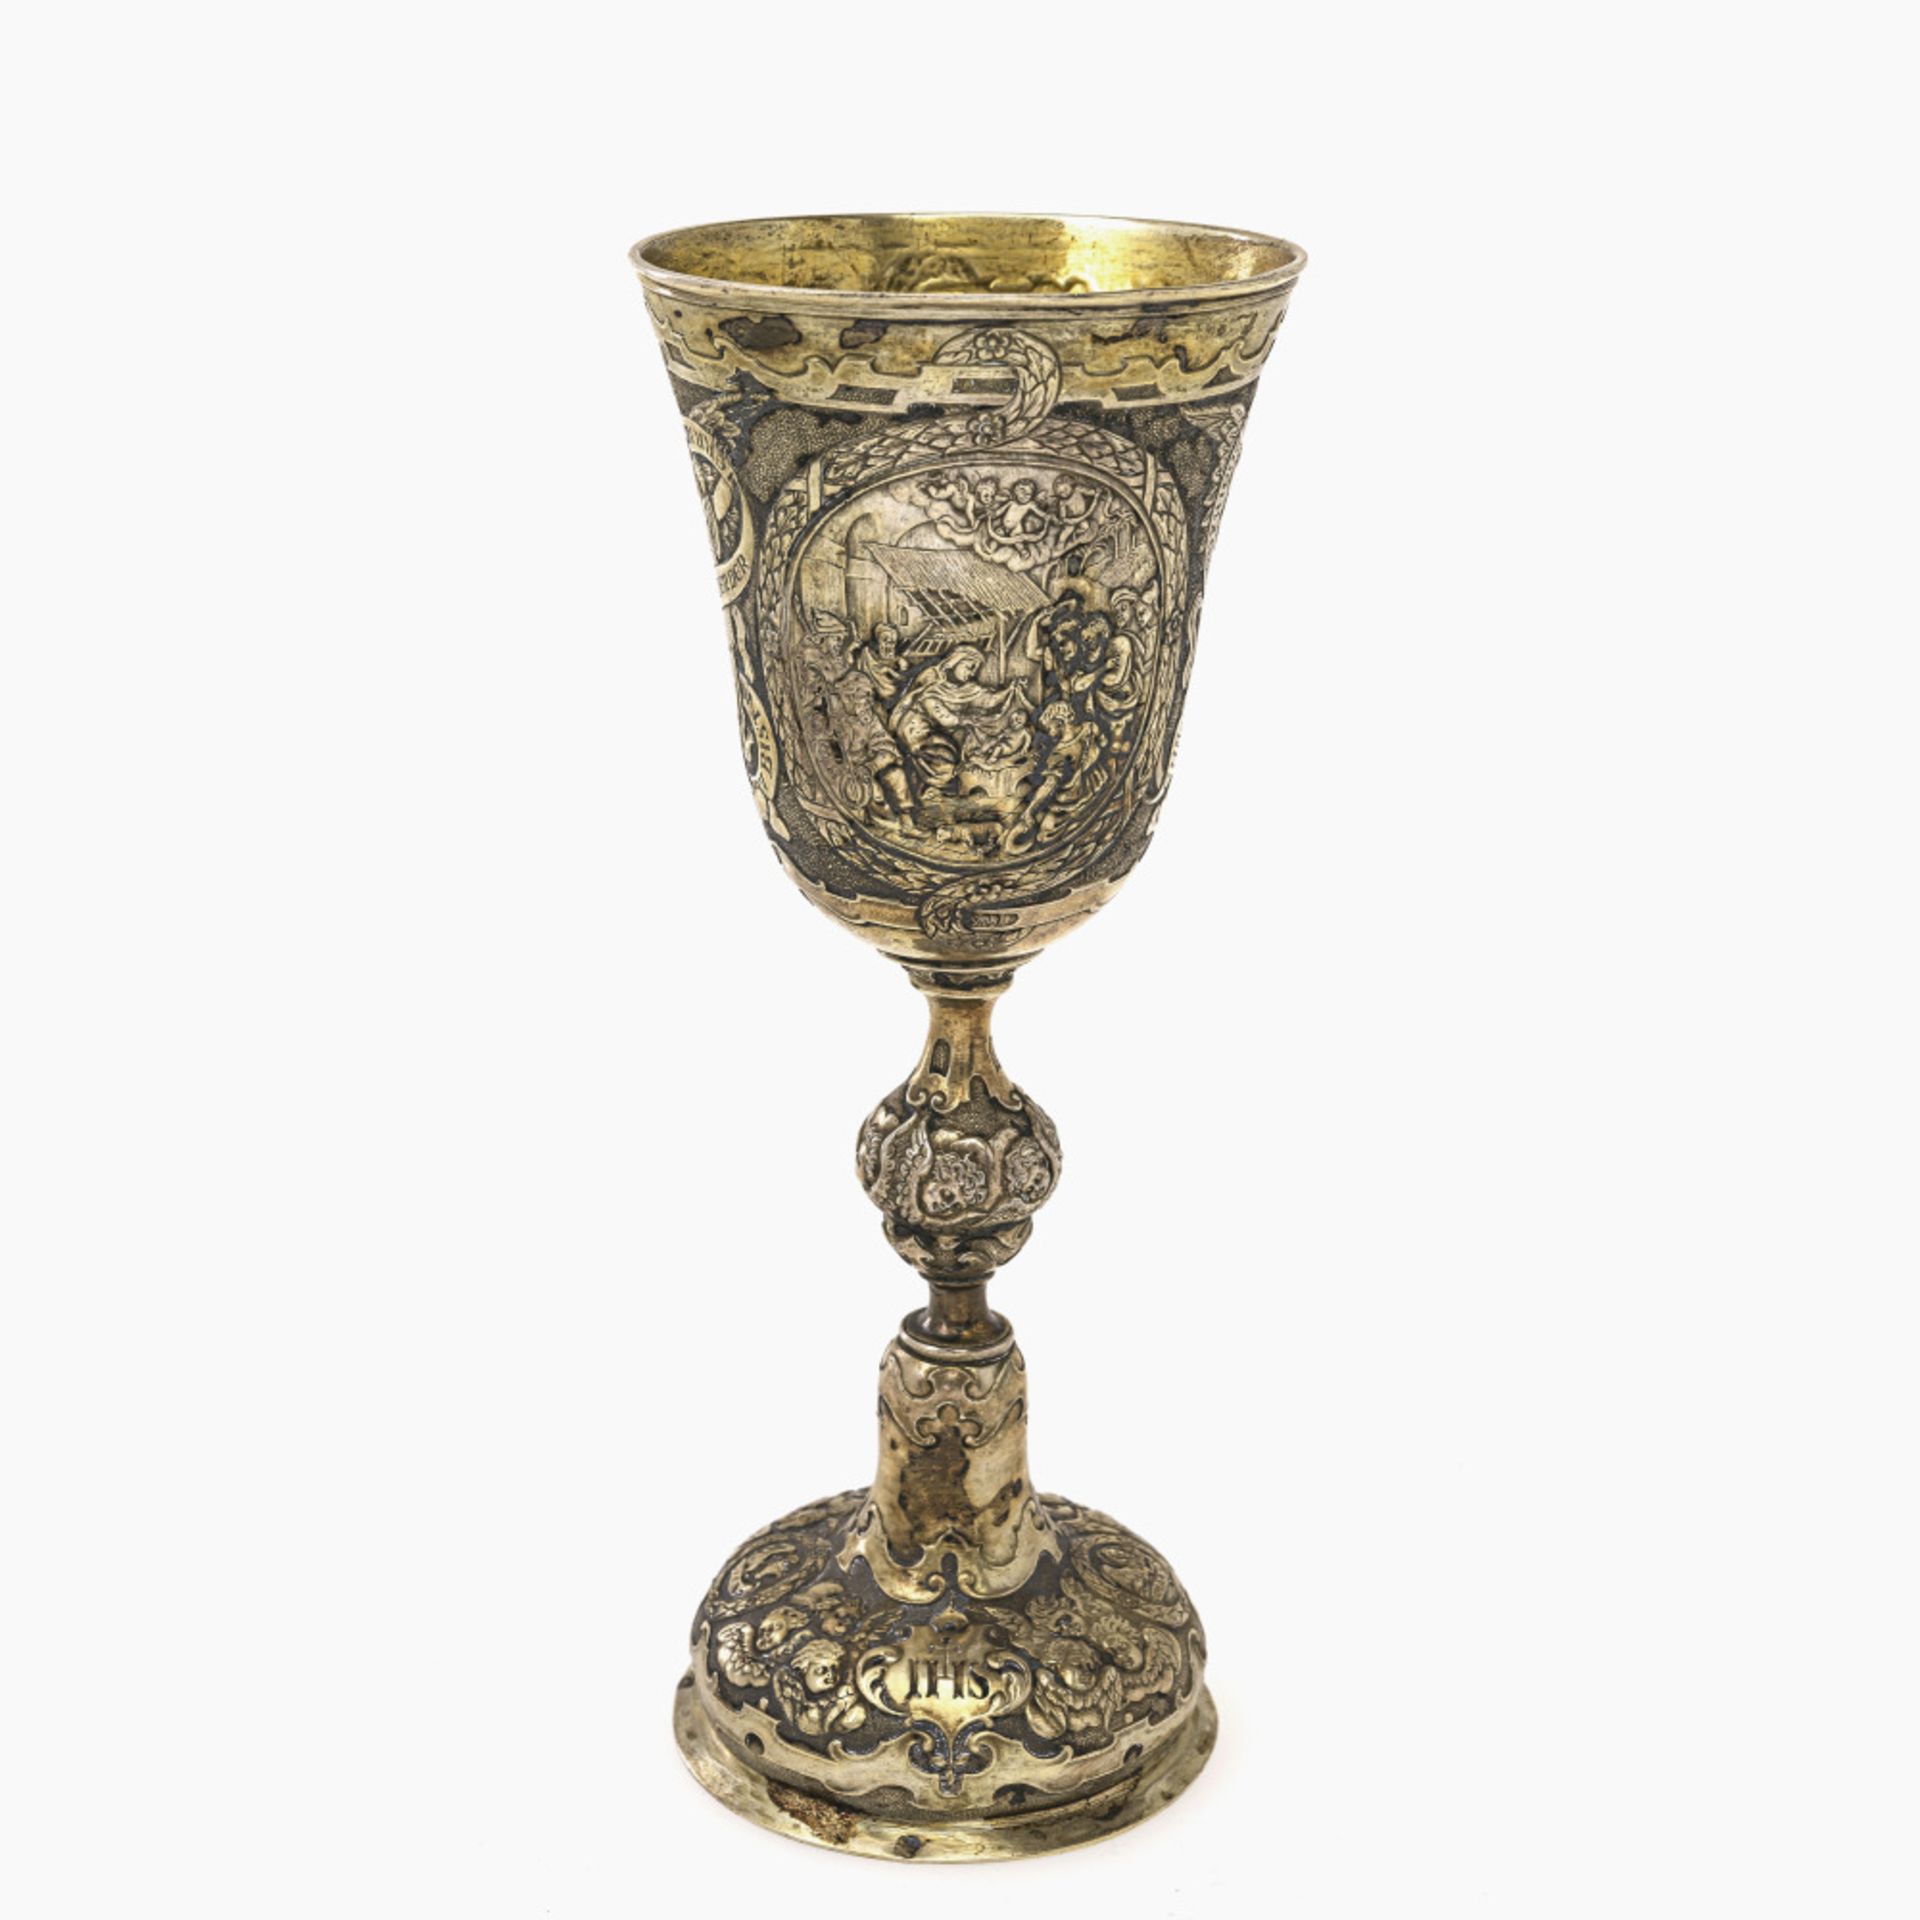 A chalice - 17th century